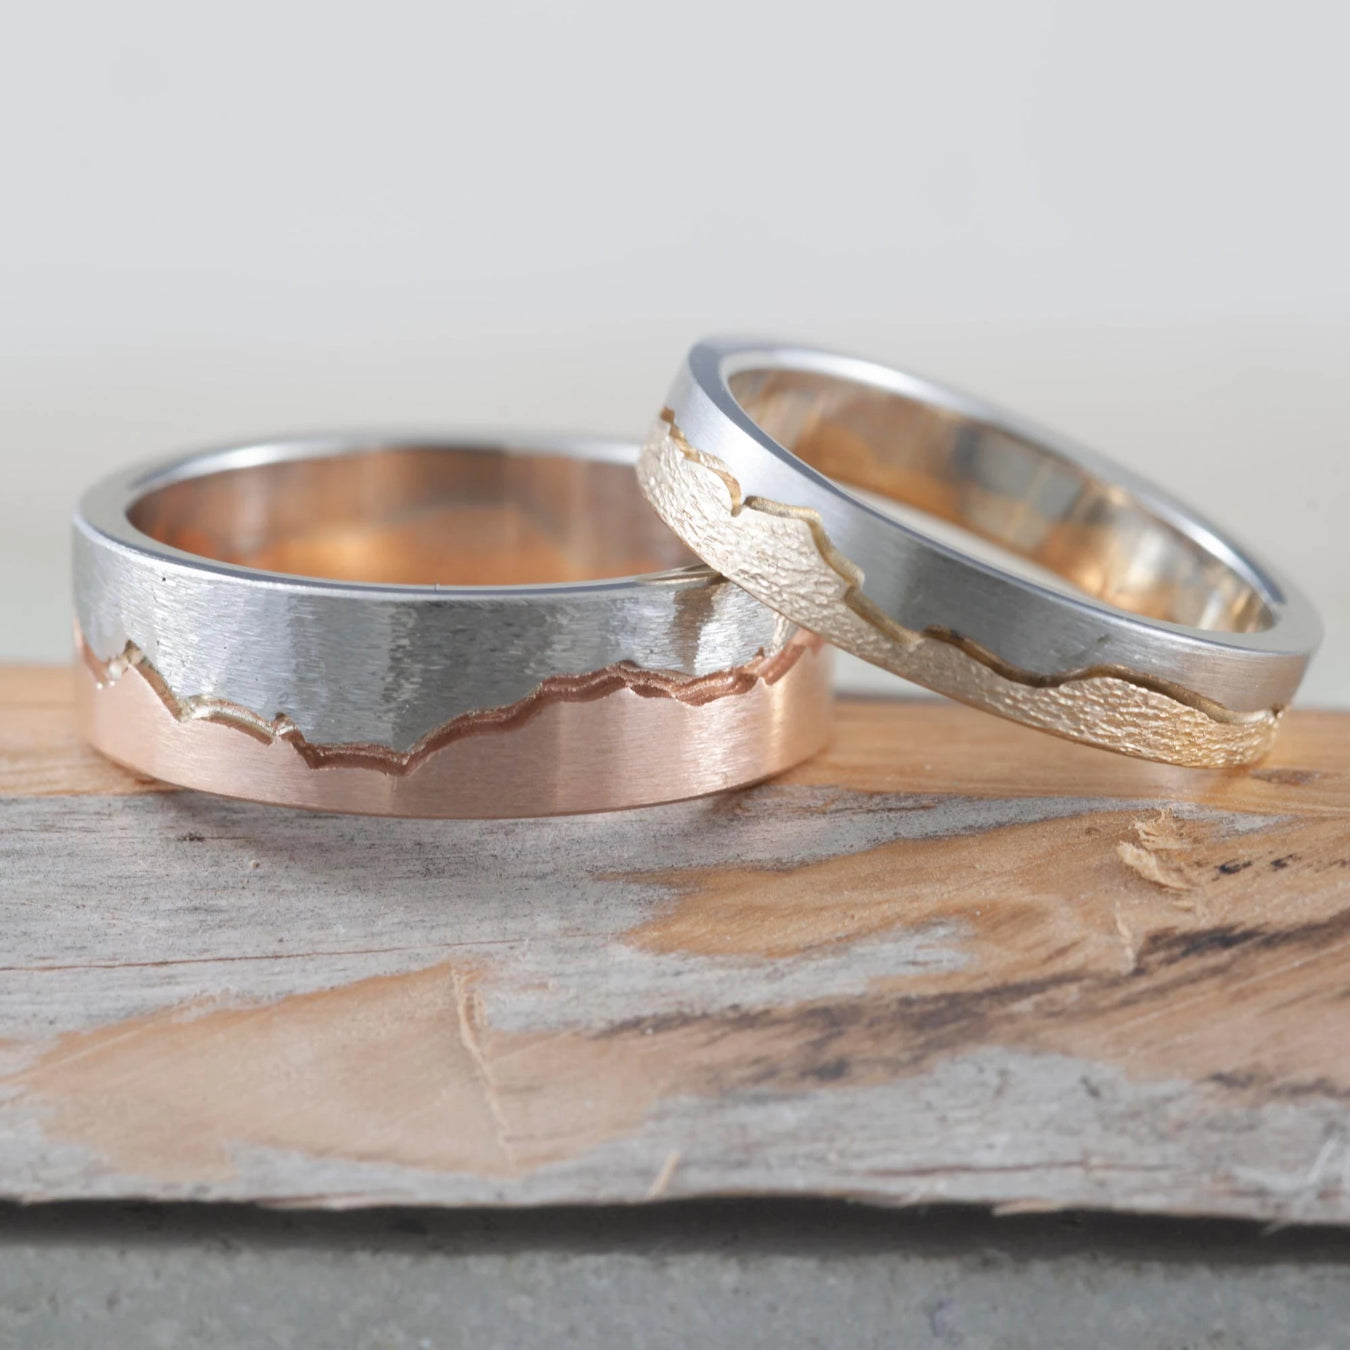 All Made to Order Wedding Rings